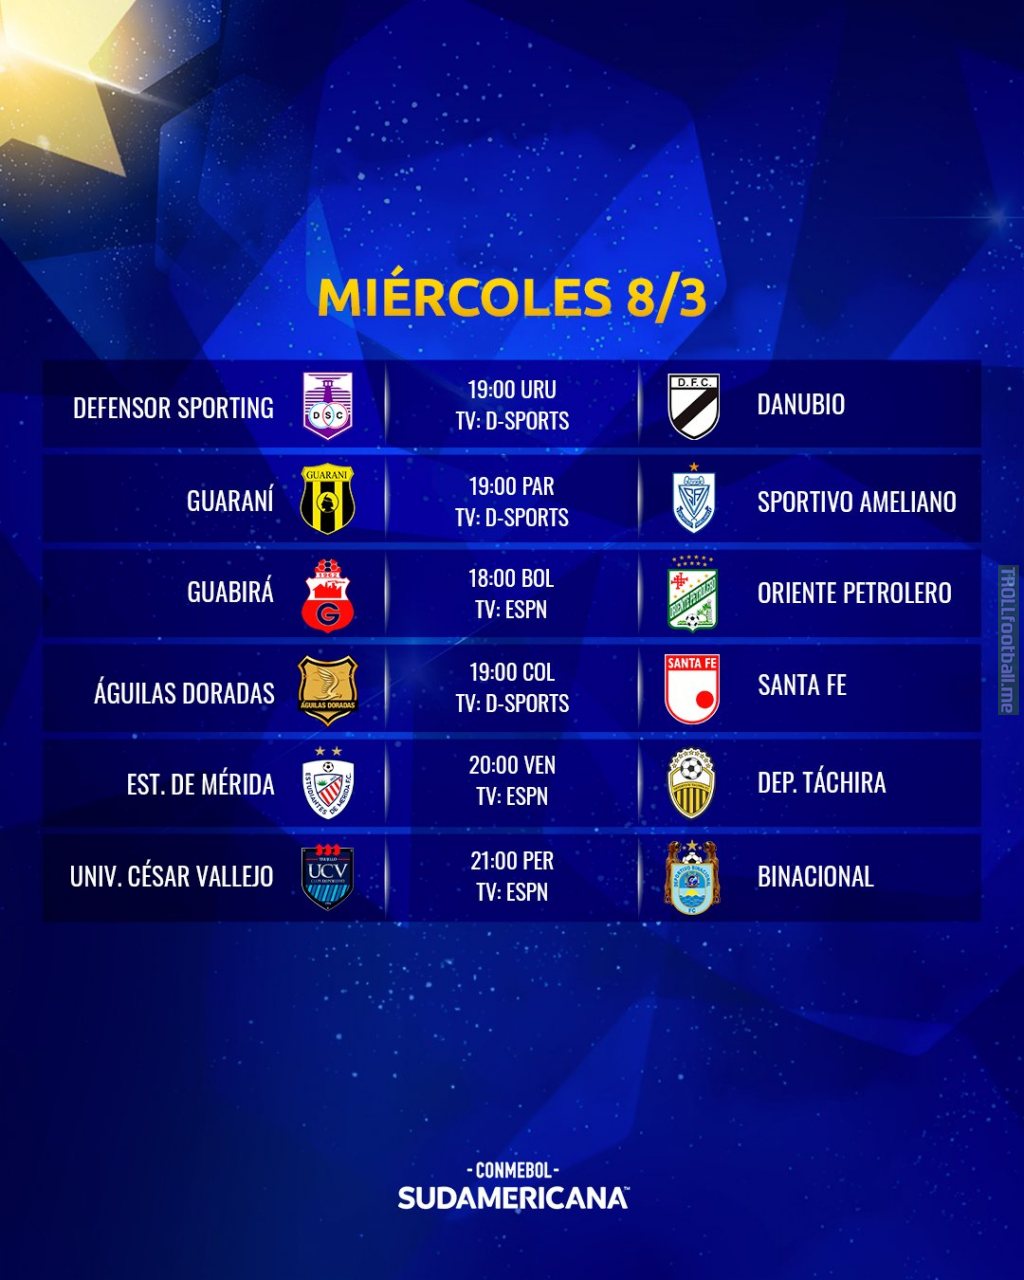 Schedule for today's Copa Sudamericana stage 1 matches.